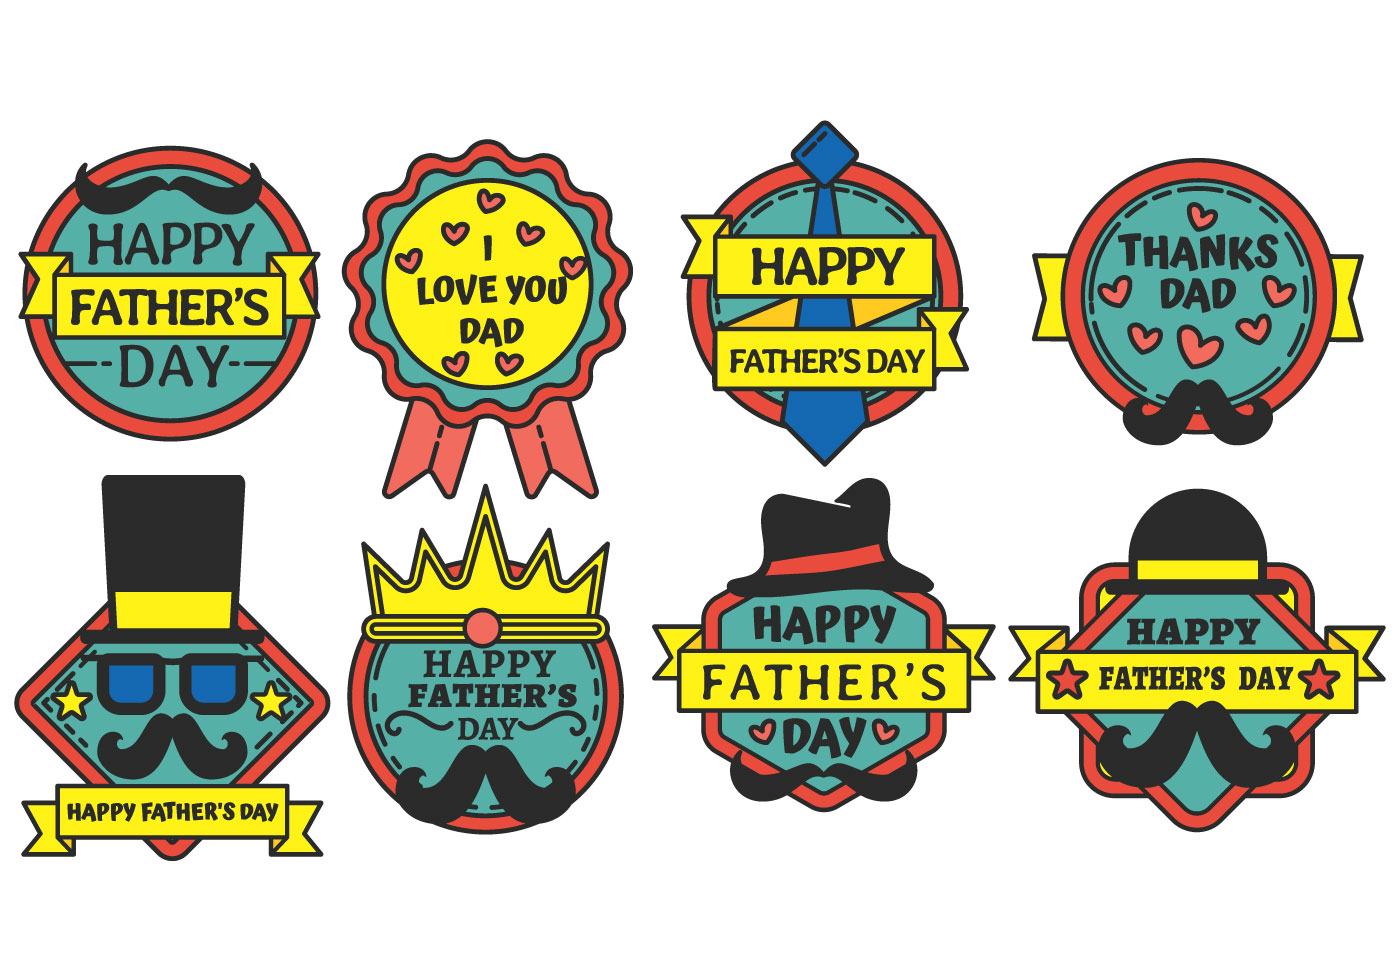 Download Happy Fathers day badge vector - Download Free Vectors ...